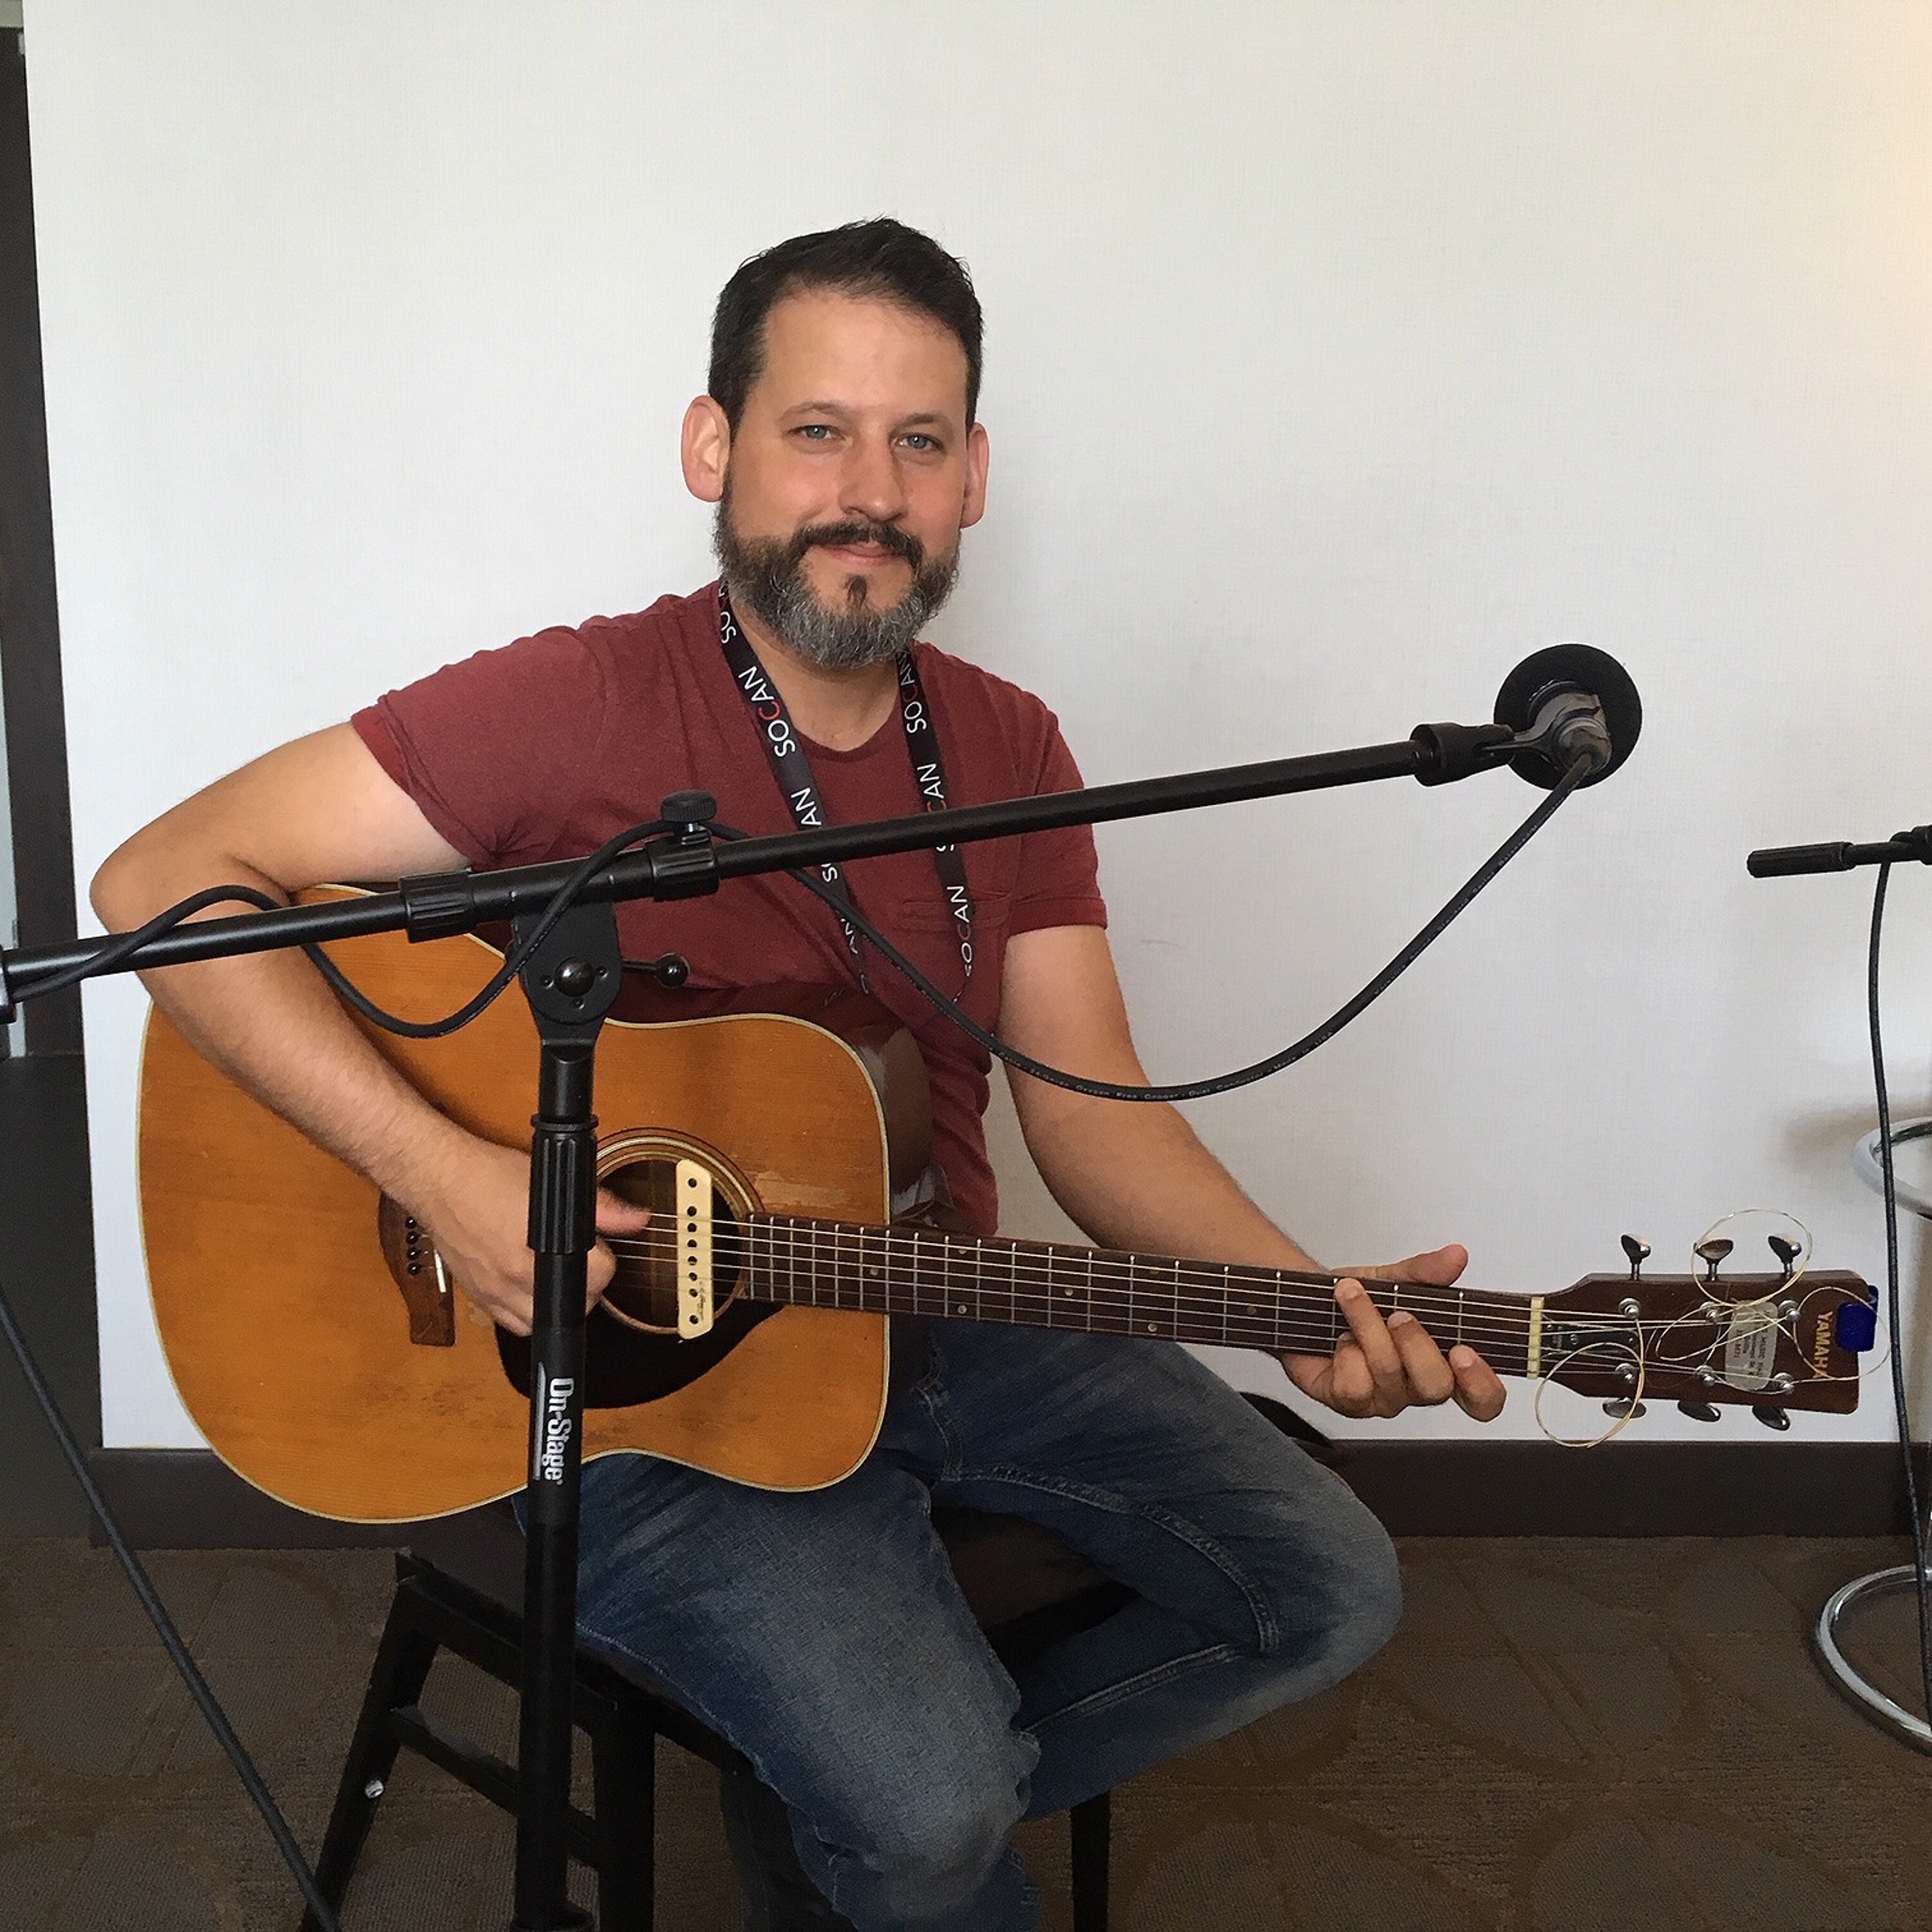 Interview - Shawn William Clarke at the 2018 Folk Music Ontario conference